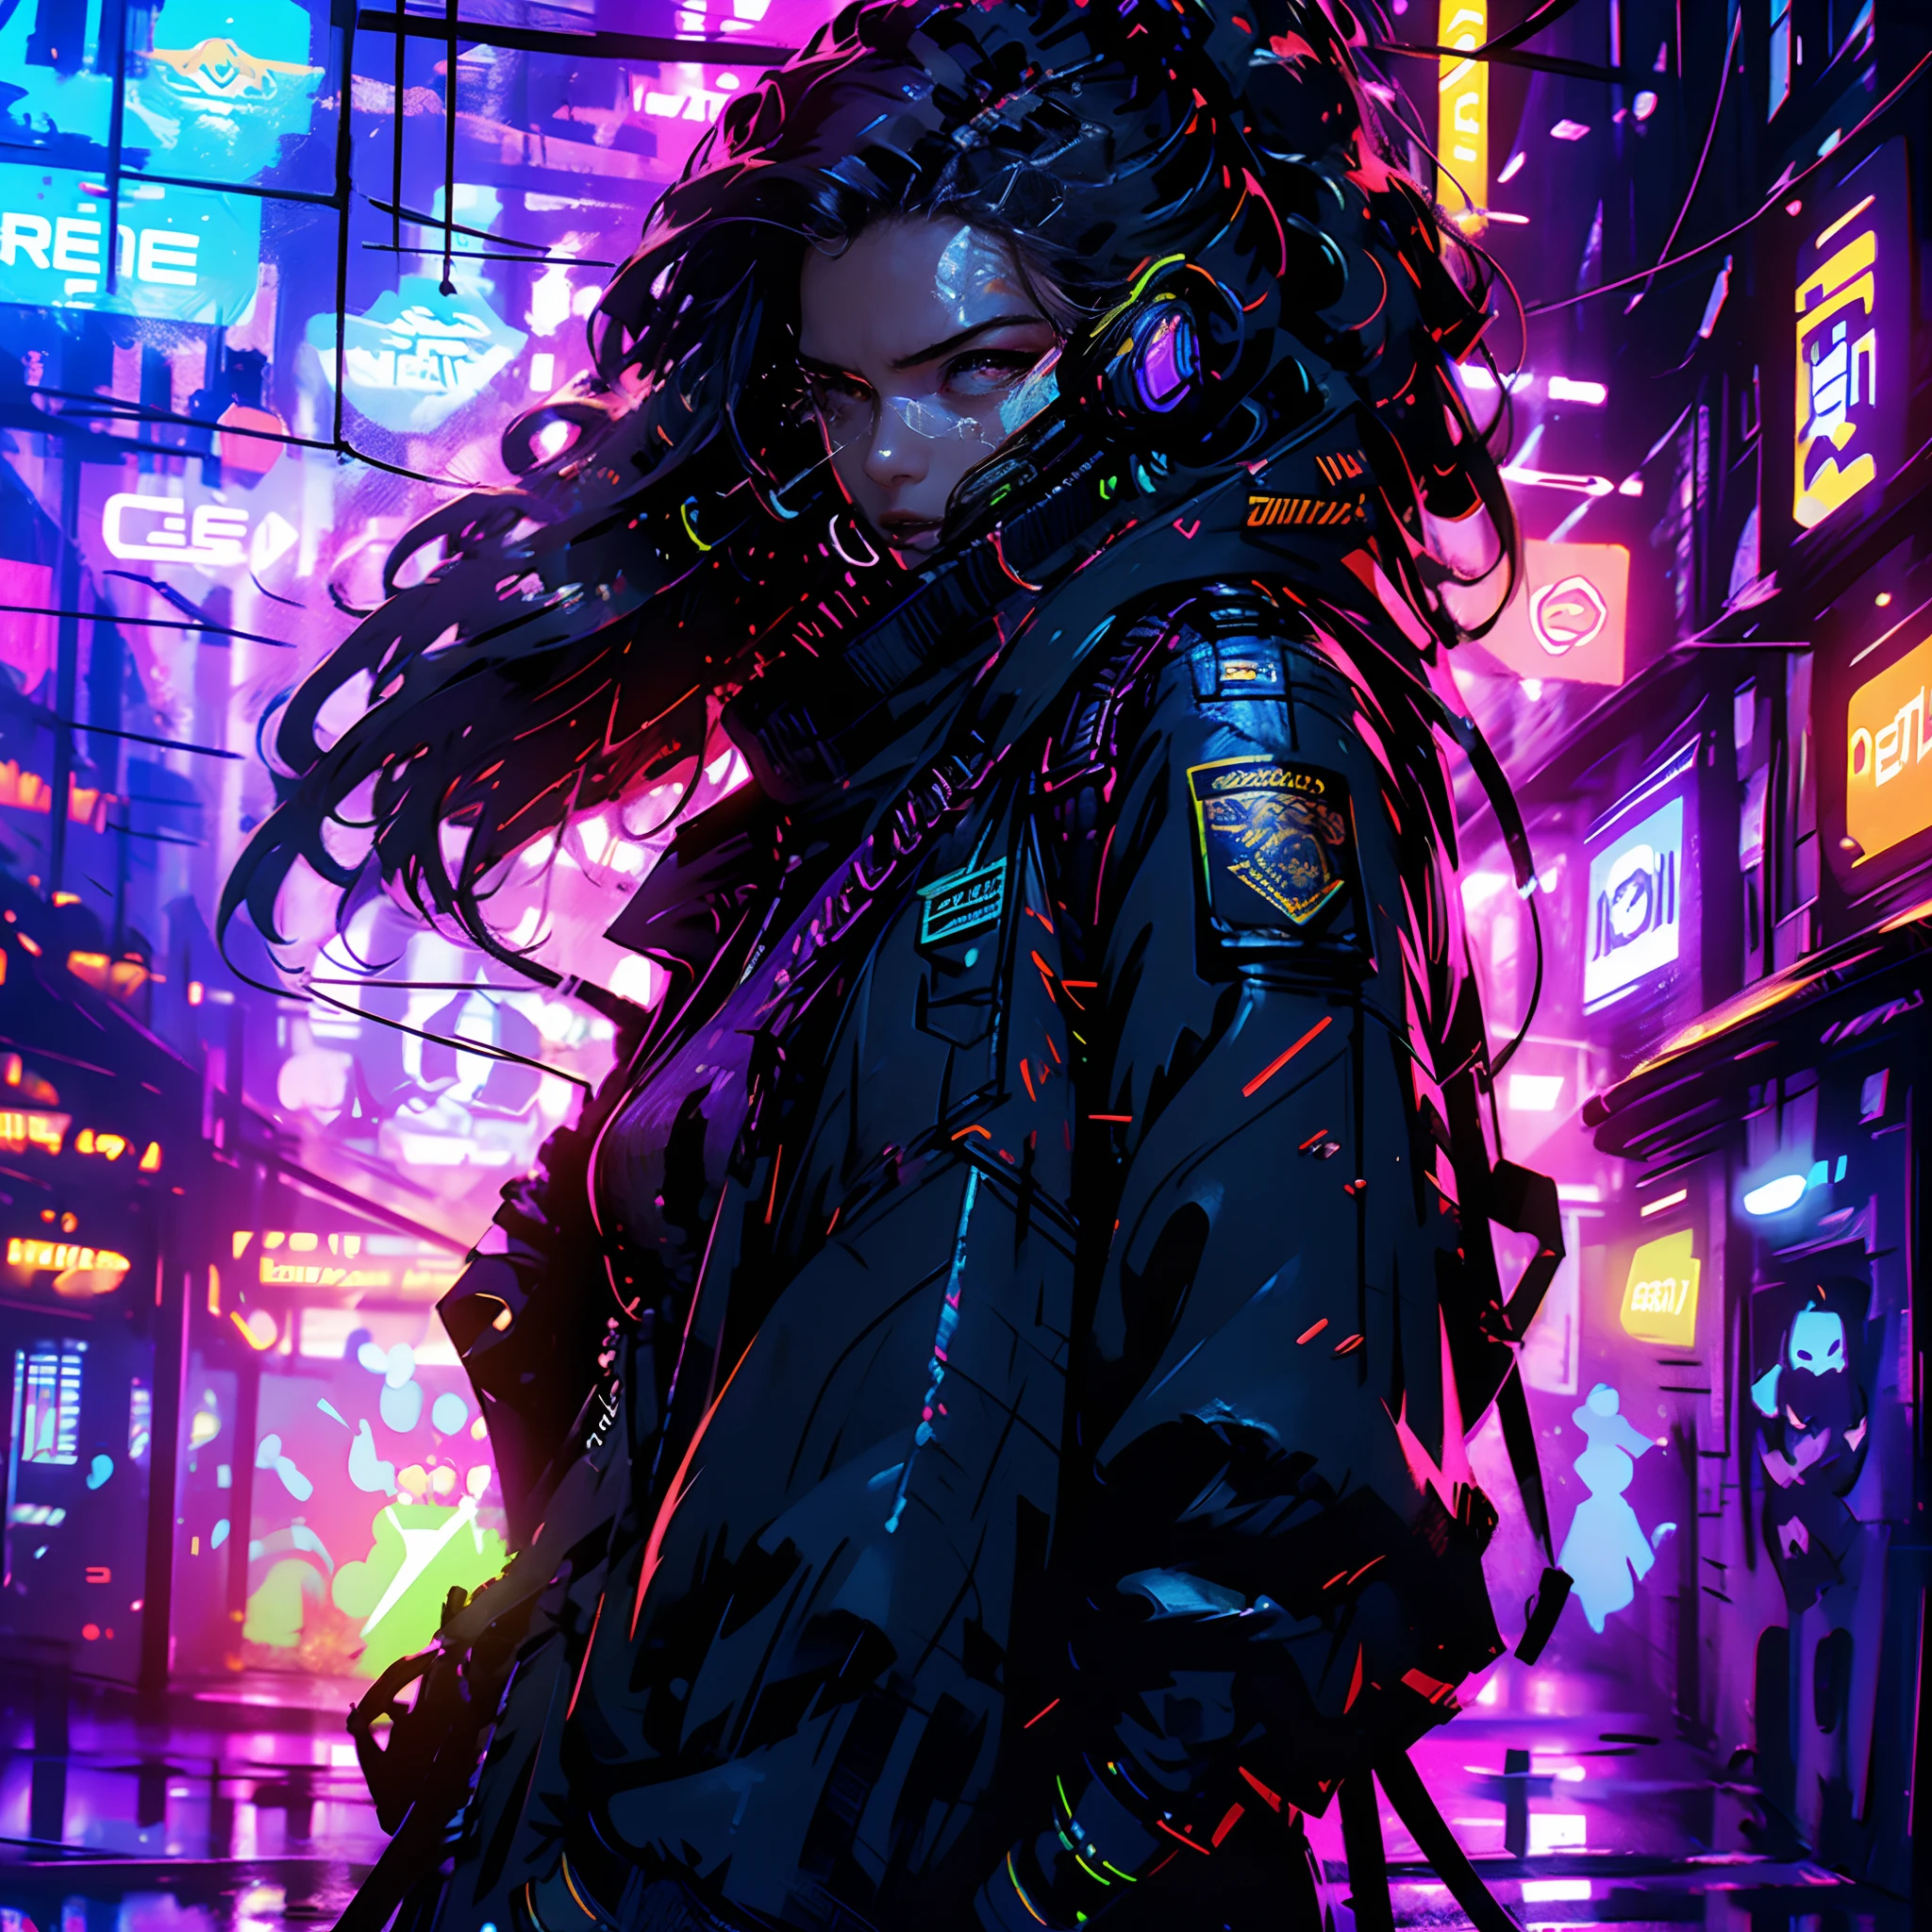 electrifying image, cyberpunk world, a sexy expert hacker girl in action wearing futuristic bodysuit, connected to a futuristic wired holographic interface, in the process of hacking, a dystopian machine structure with wires is connected to her head, connected to the net, netrunner, Neon lights, cascading lines of code, and futuristic technology in the background, gritty high-tech atmosphere, causing chaos within the corporate network, glitches, alarms, and digital distortions emanating from the breached system, police standing around her pointing their guns at her, cyberpunk heist, cyberpunk hacker, digital underworld